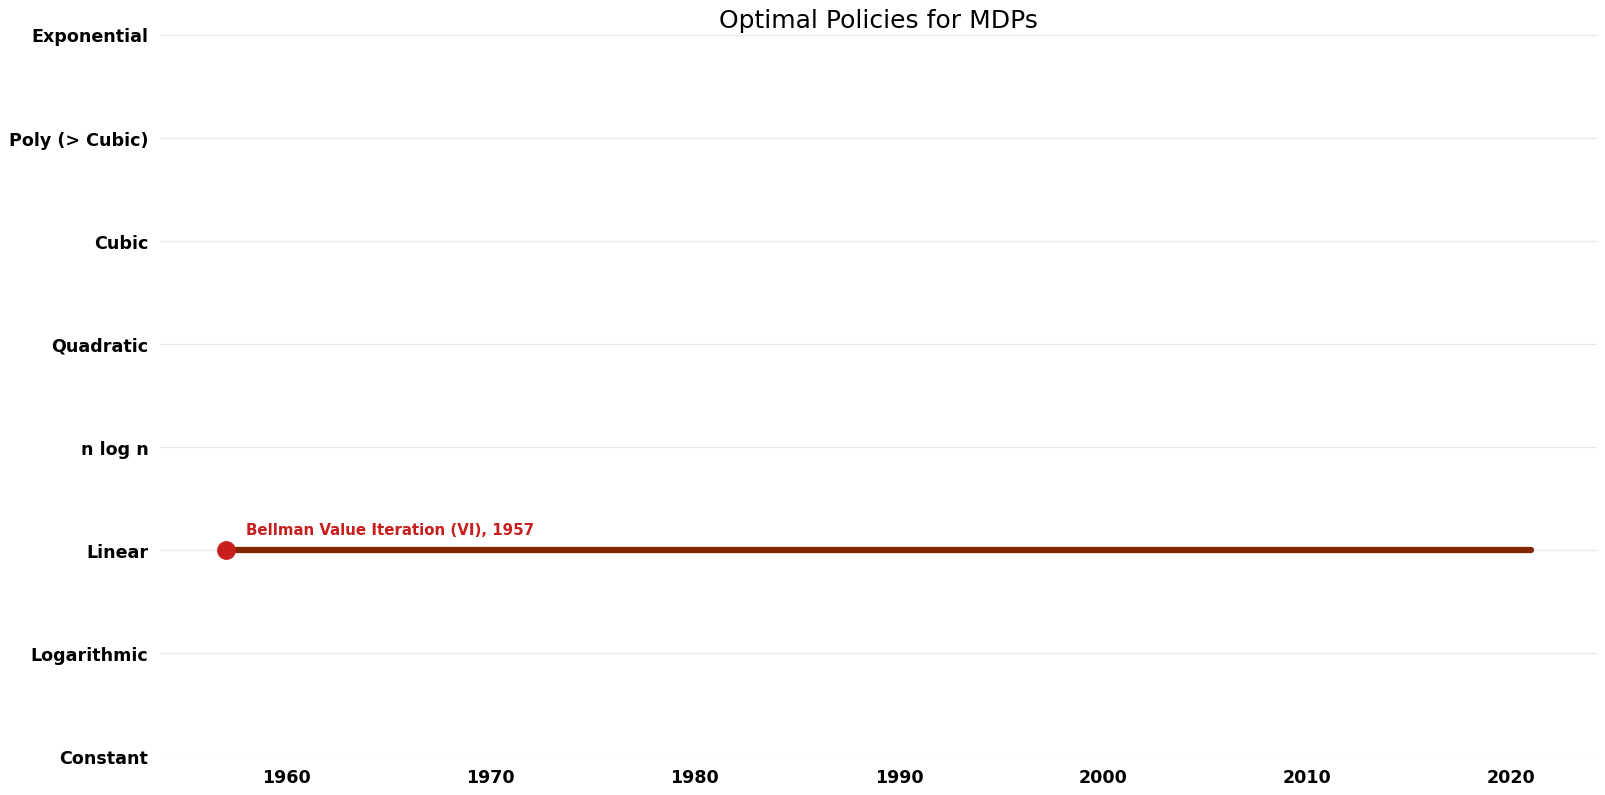 File:Optimal Policies for MDPs - Space.png